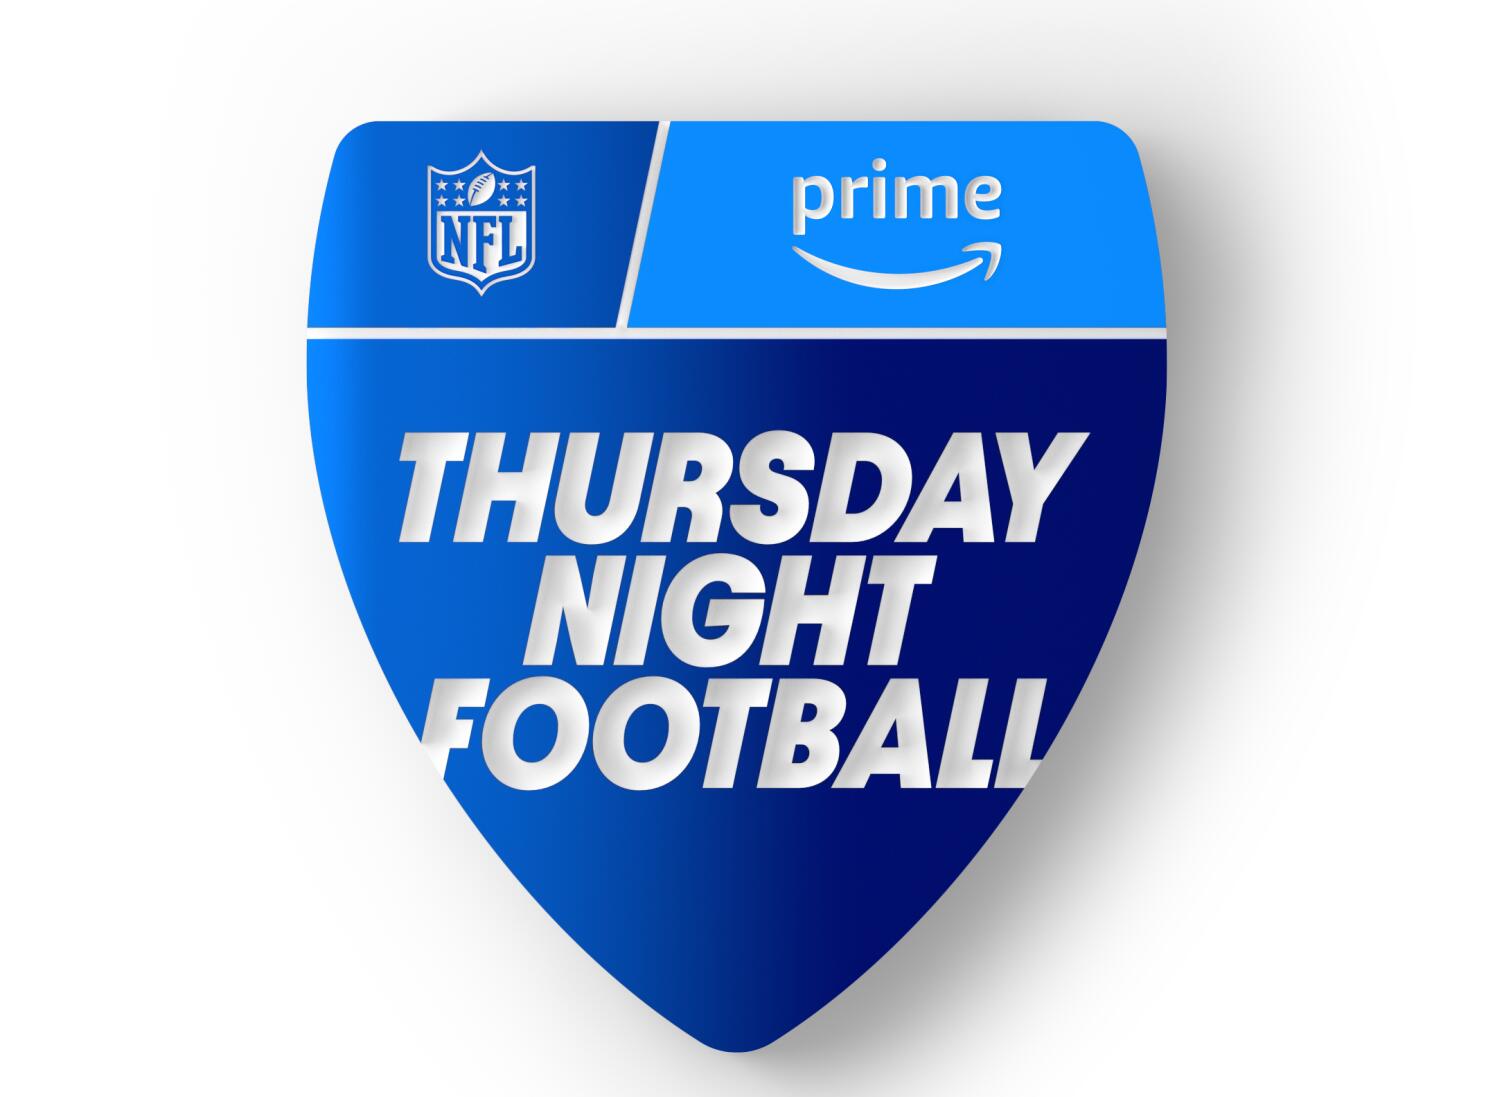 Prime Video Announces Upcoming NFL Thursday Night Football  Programming Beginning This Week